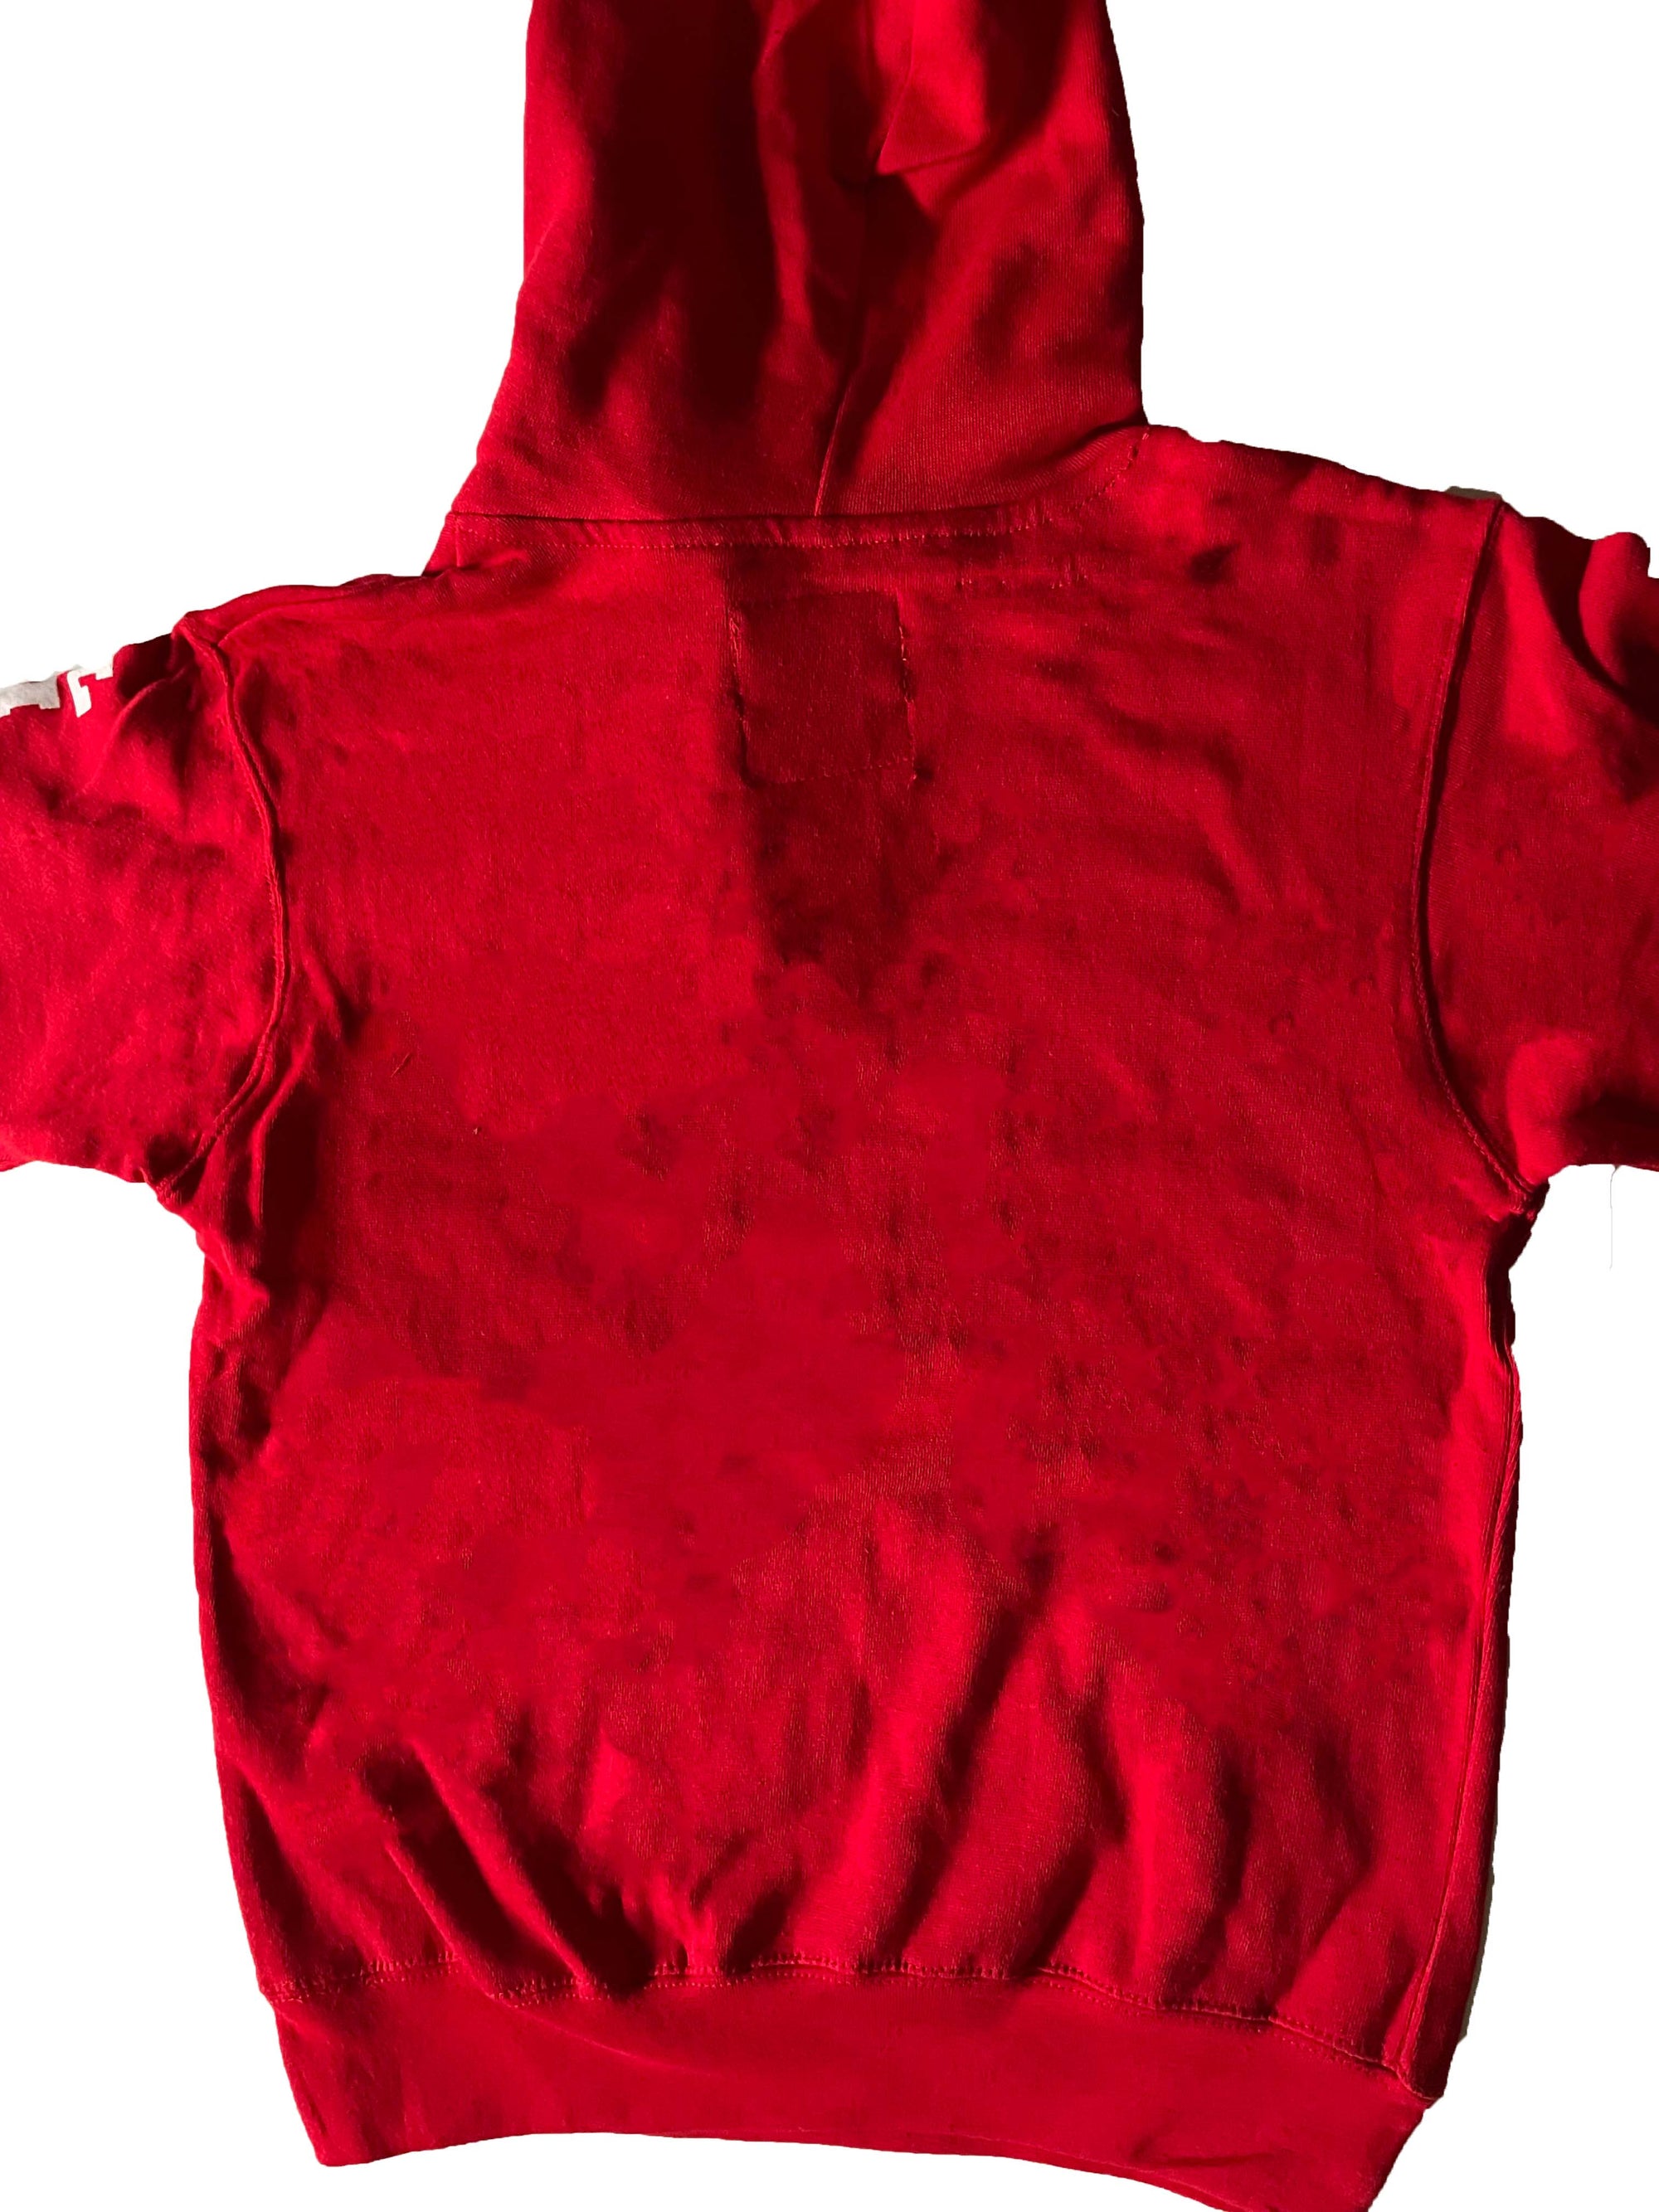 LifeGuard Hoodie (Red) - American Outdoor Woman